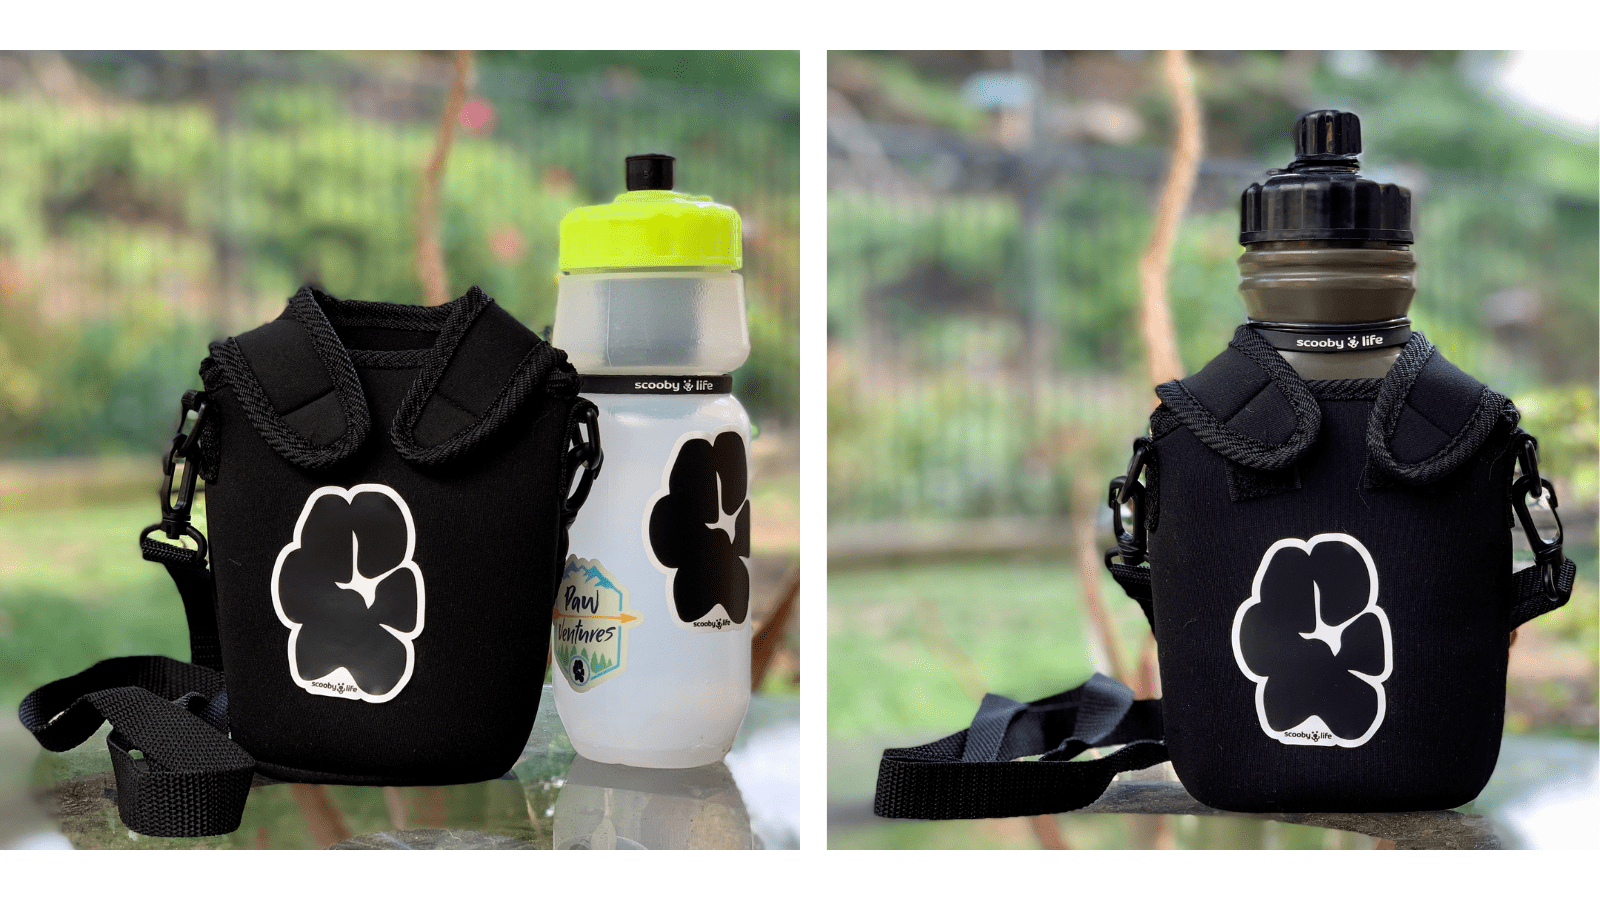 Scoobylife by PawVentures Self Filtering Sport Water Bottle and Canteen